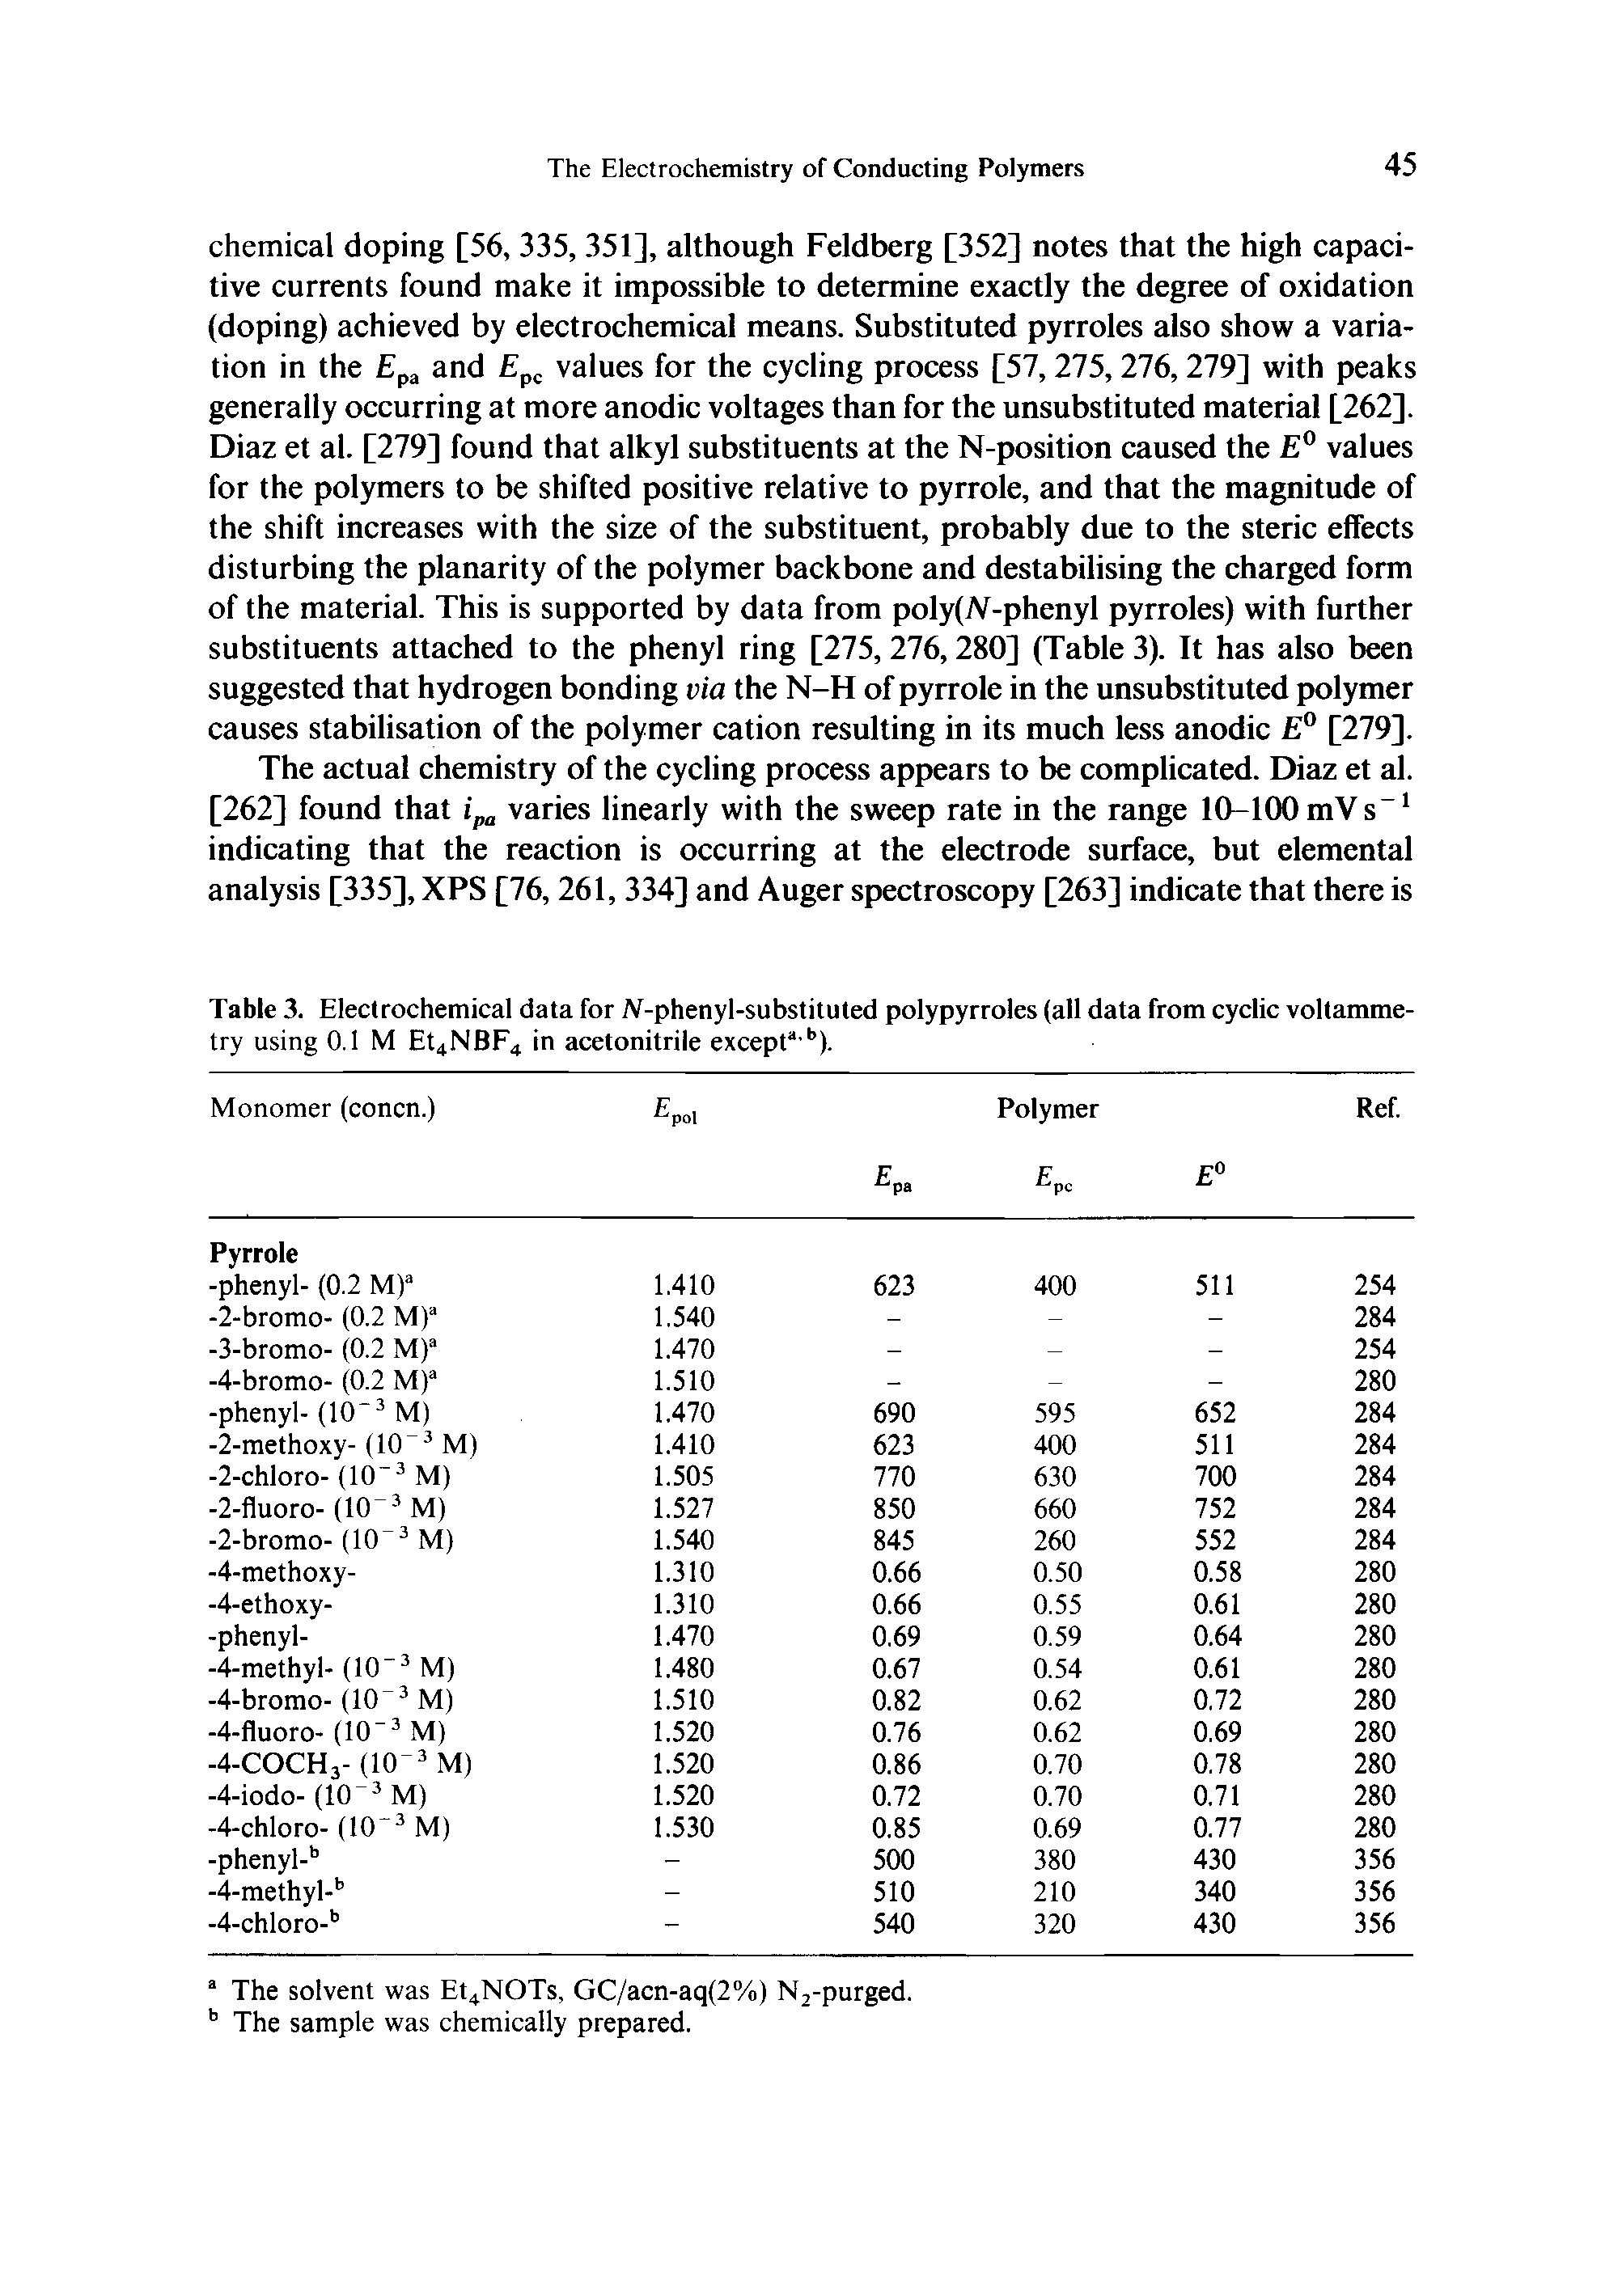 Table 3. Electrochemical data for AT-phenyl-substituted polypyrroles (all data from cyclic voltammetry using 0.1 M Et4NBF4 in acetonitrile exceptab).